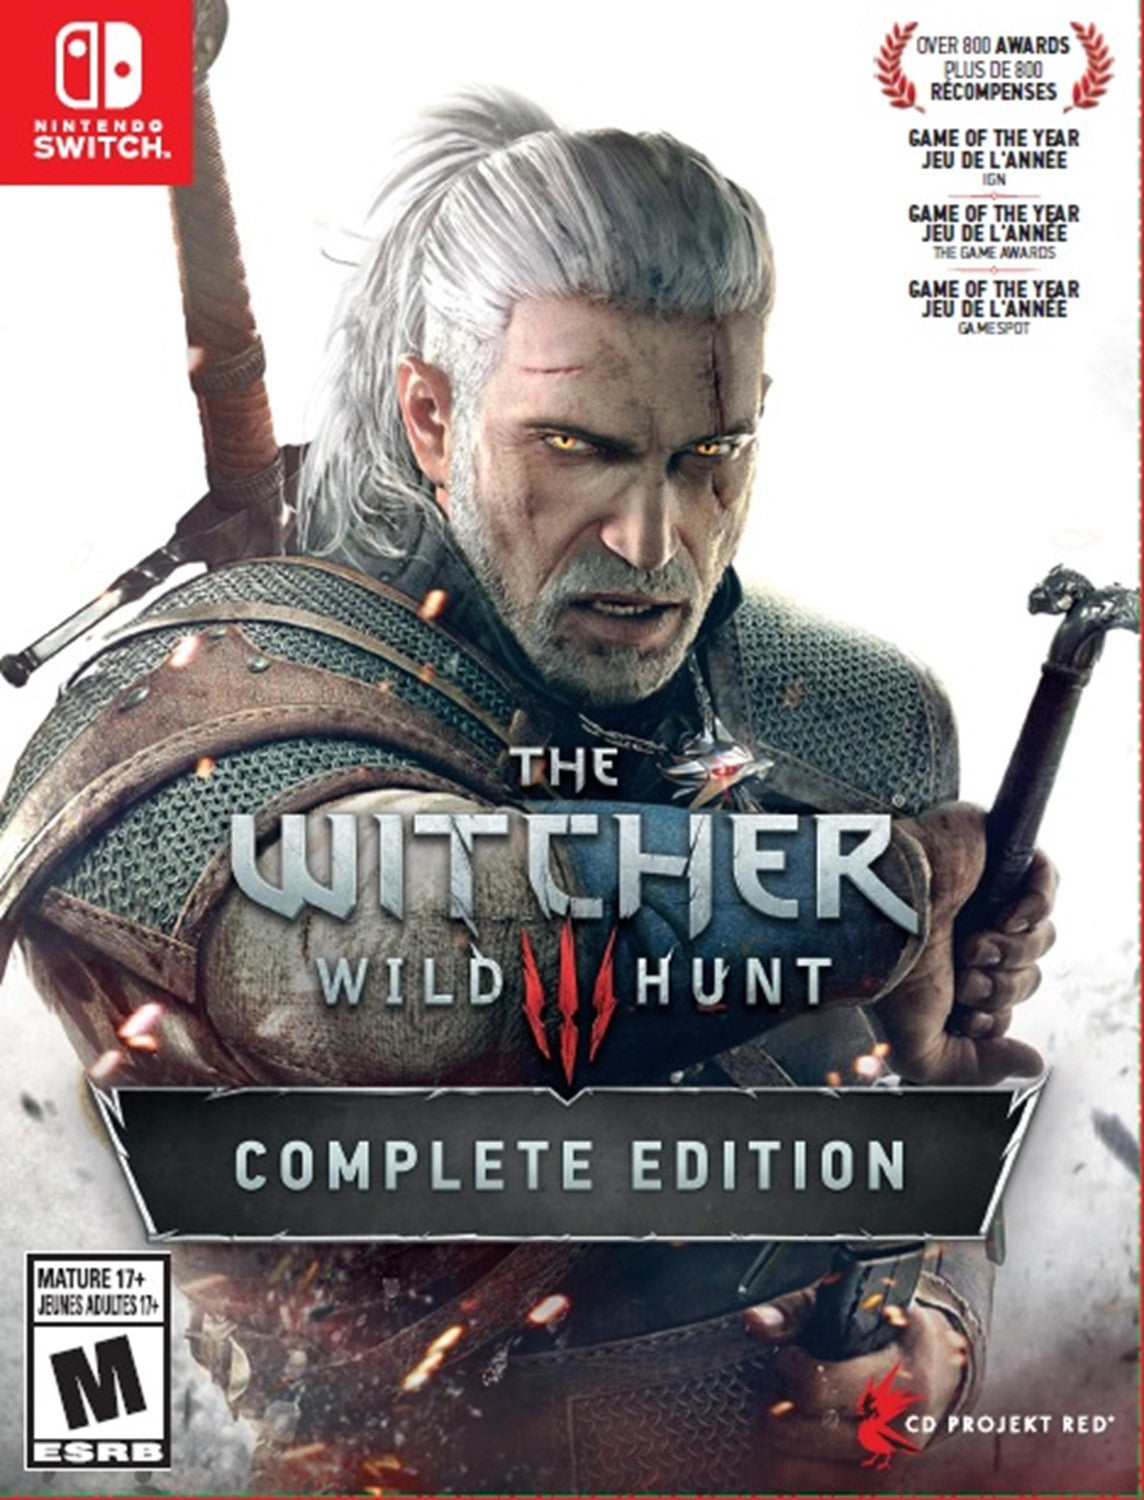 Witcher 3 Wild Hunt Complete Edition - Nintendo Switch